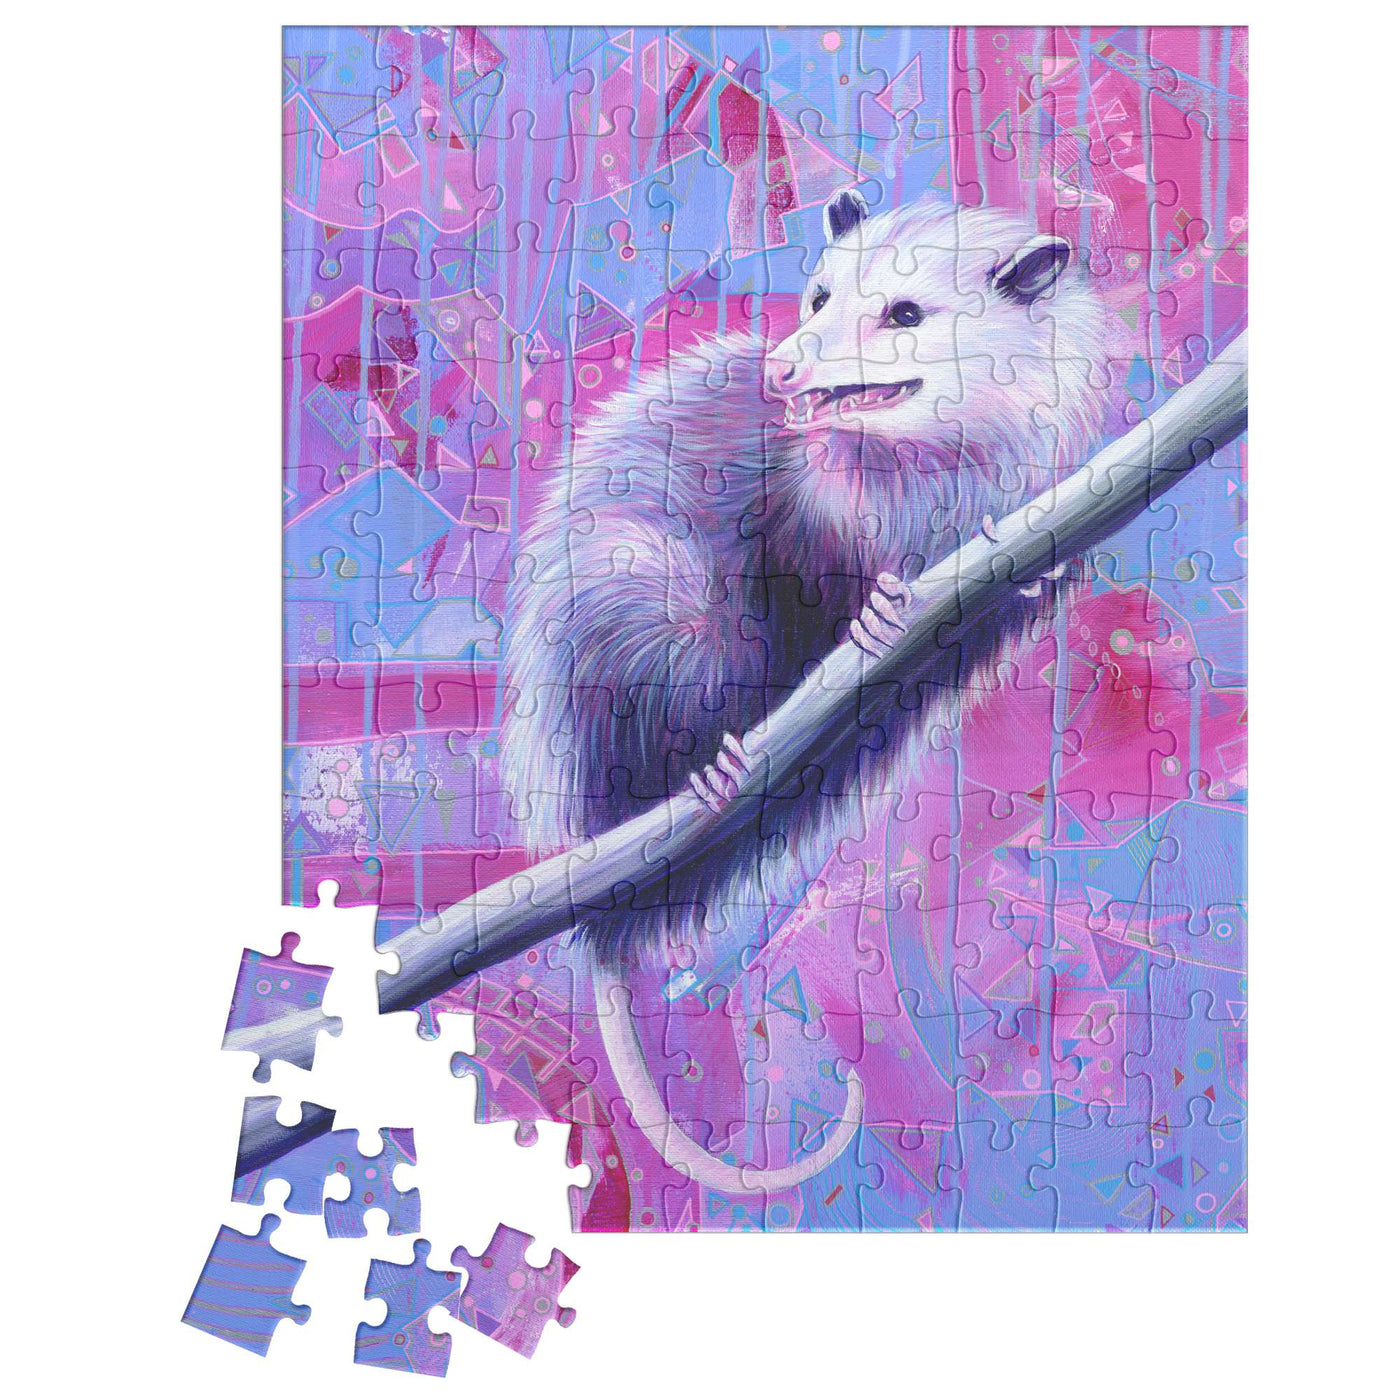 A colorful Opossum Puzzle depicting a white possum on a branch with several pieces detached, on a pink and blue background.